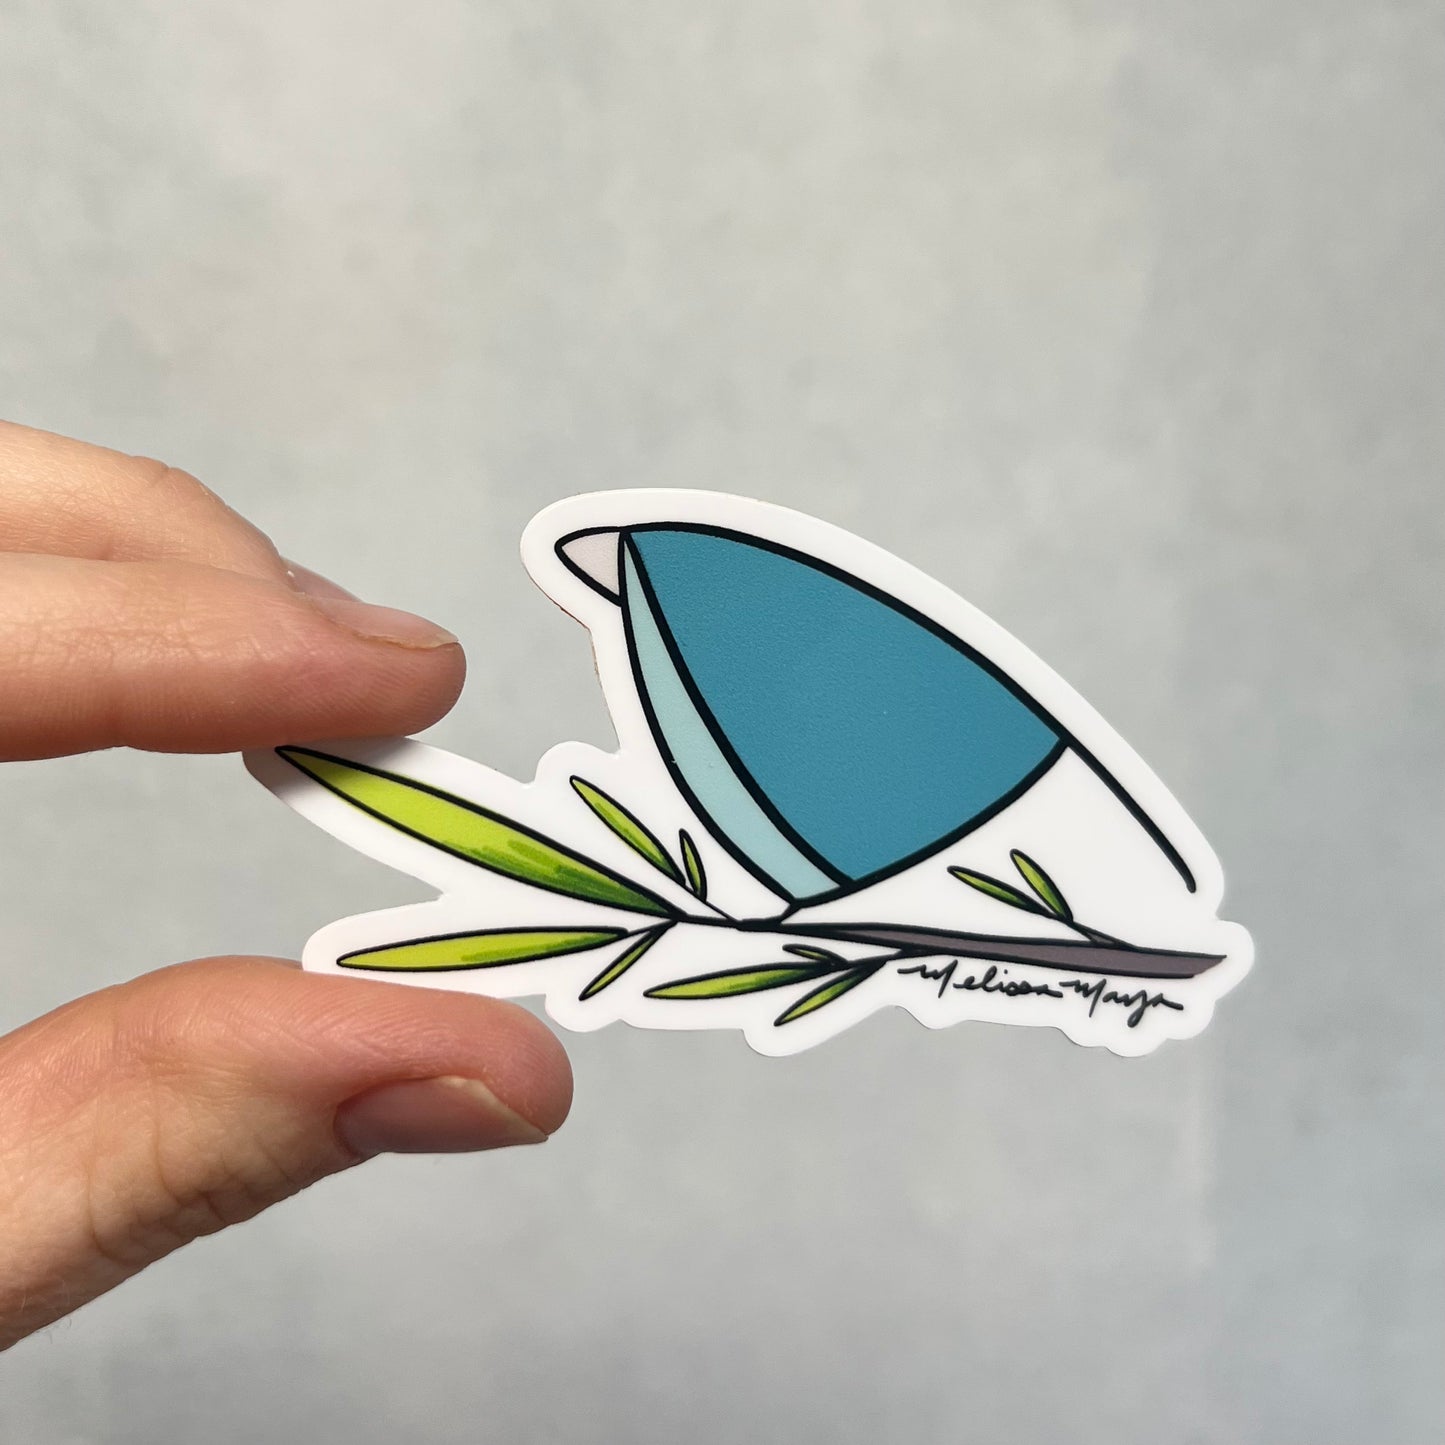 Blue Bird STICKER. 3 x 2 inches. SCROLL DOWN to build you sticker pack - 20% off two or more